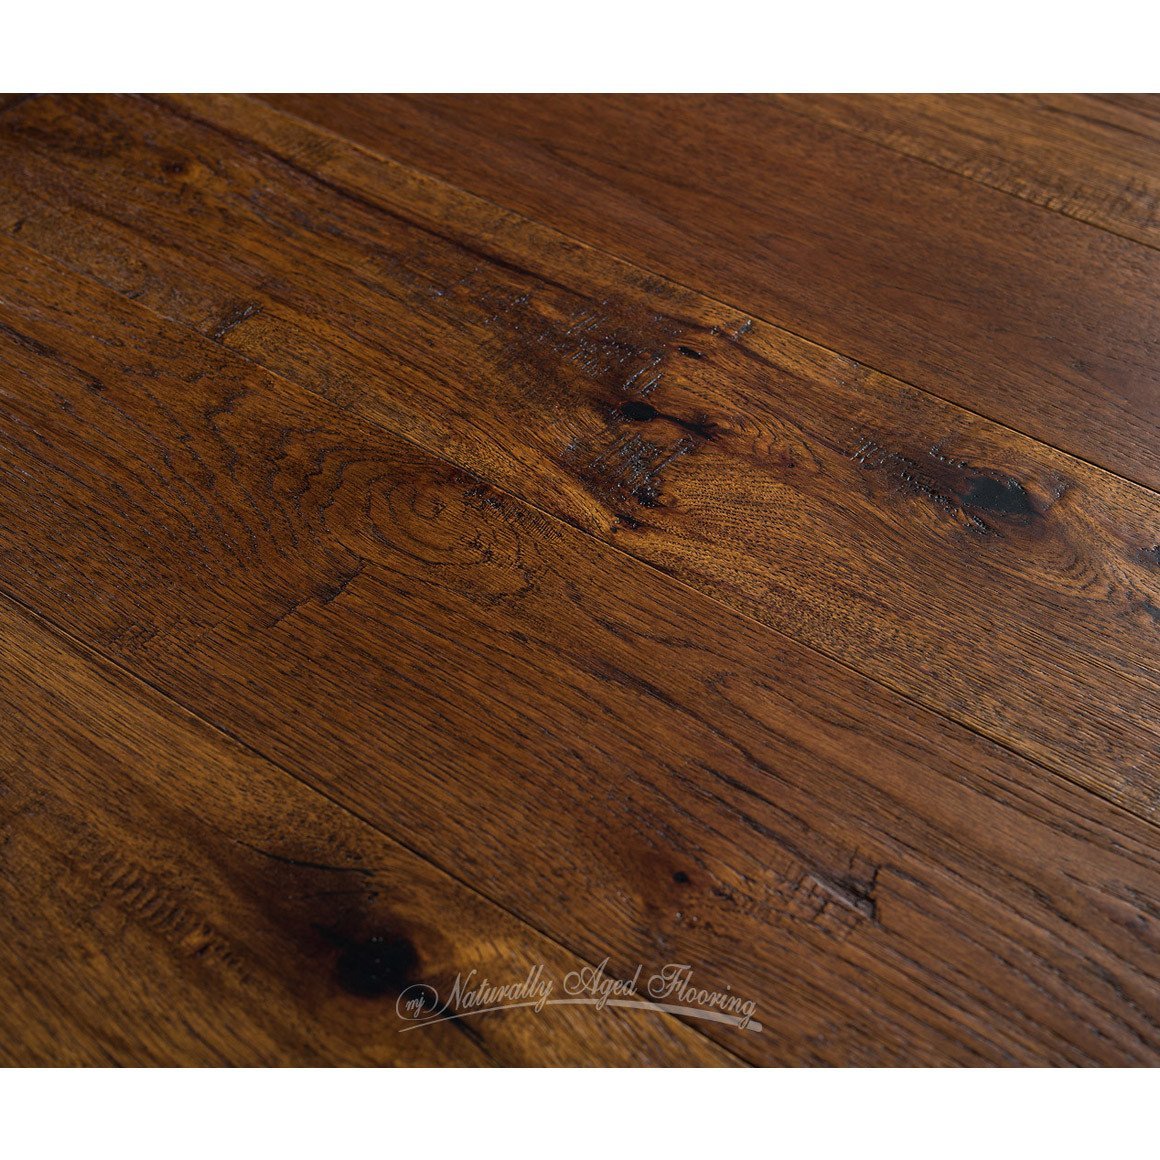 Naturally Aged Flooring Medallion Collection Lost Canyon Zoom